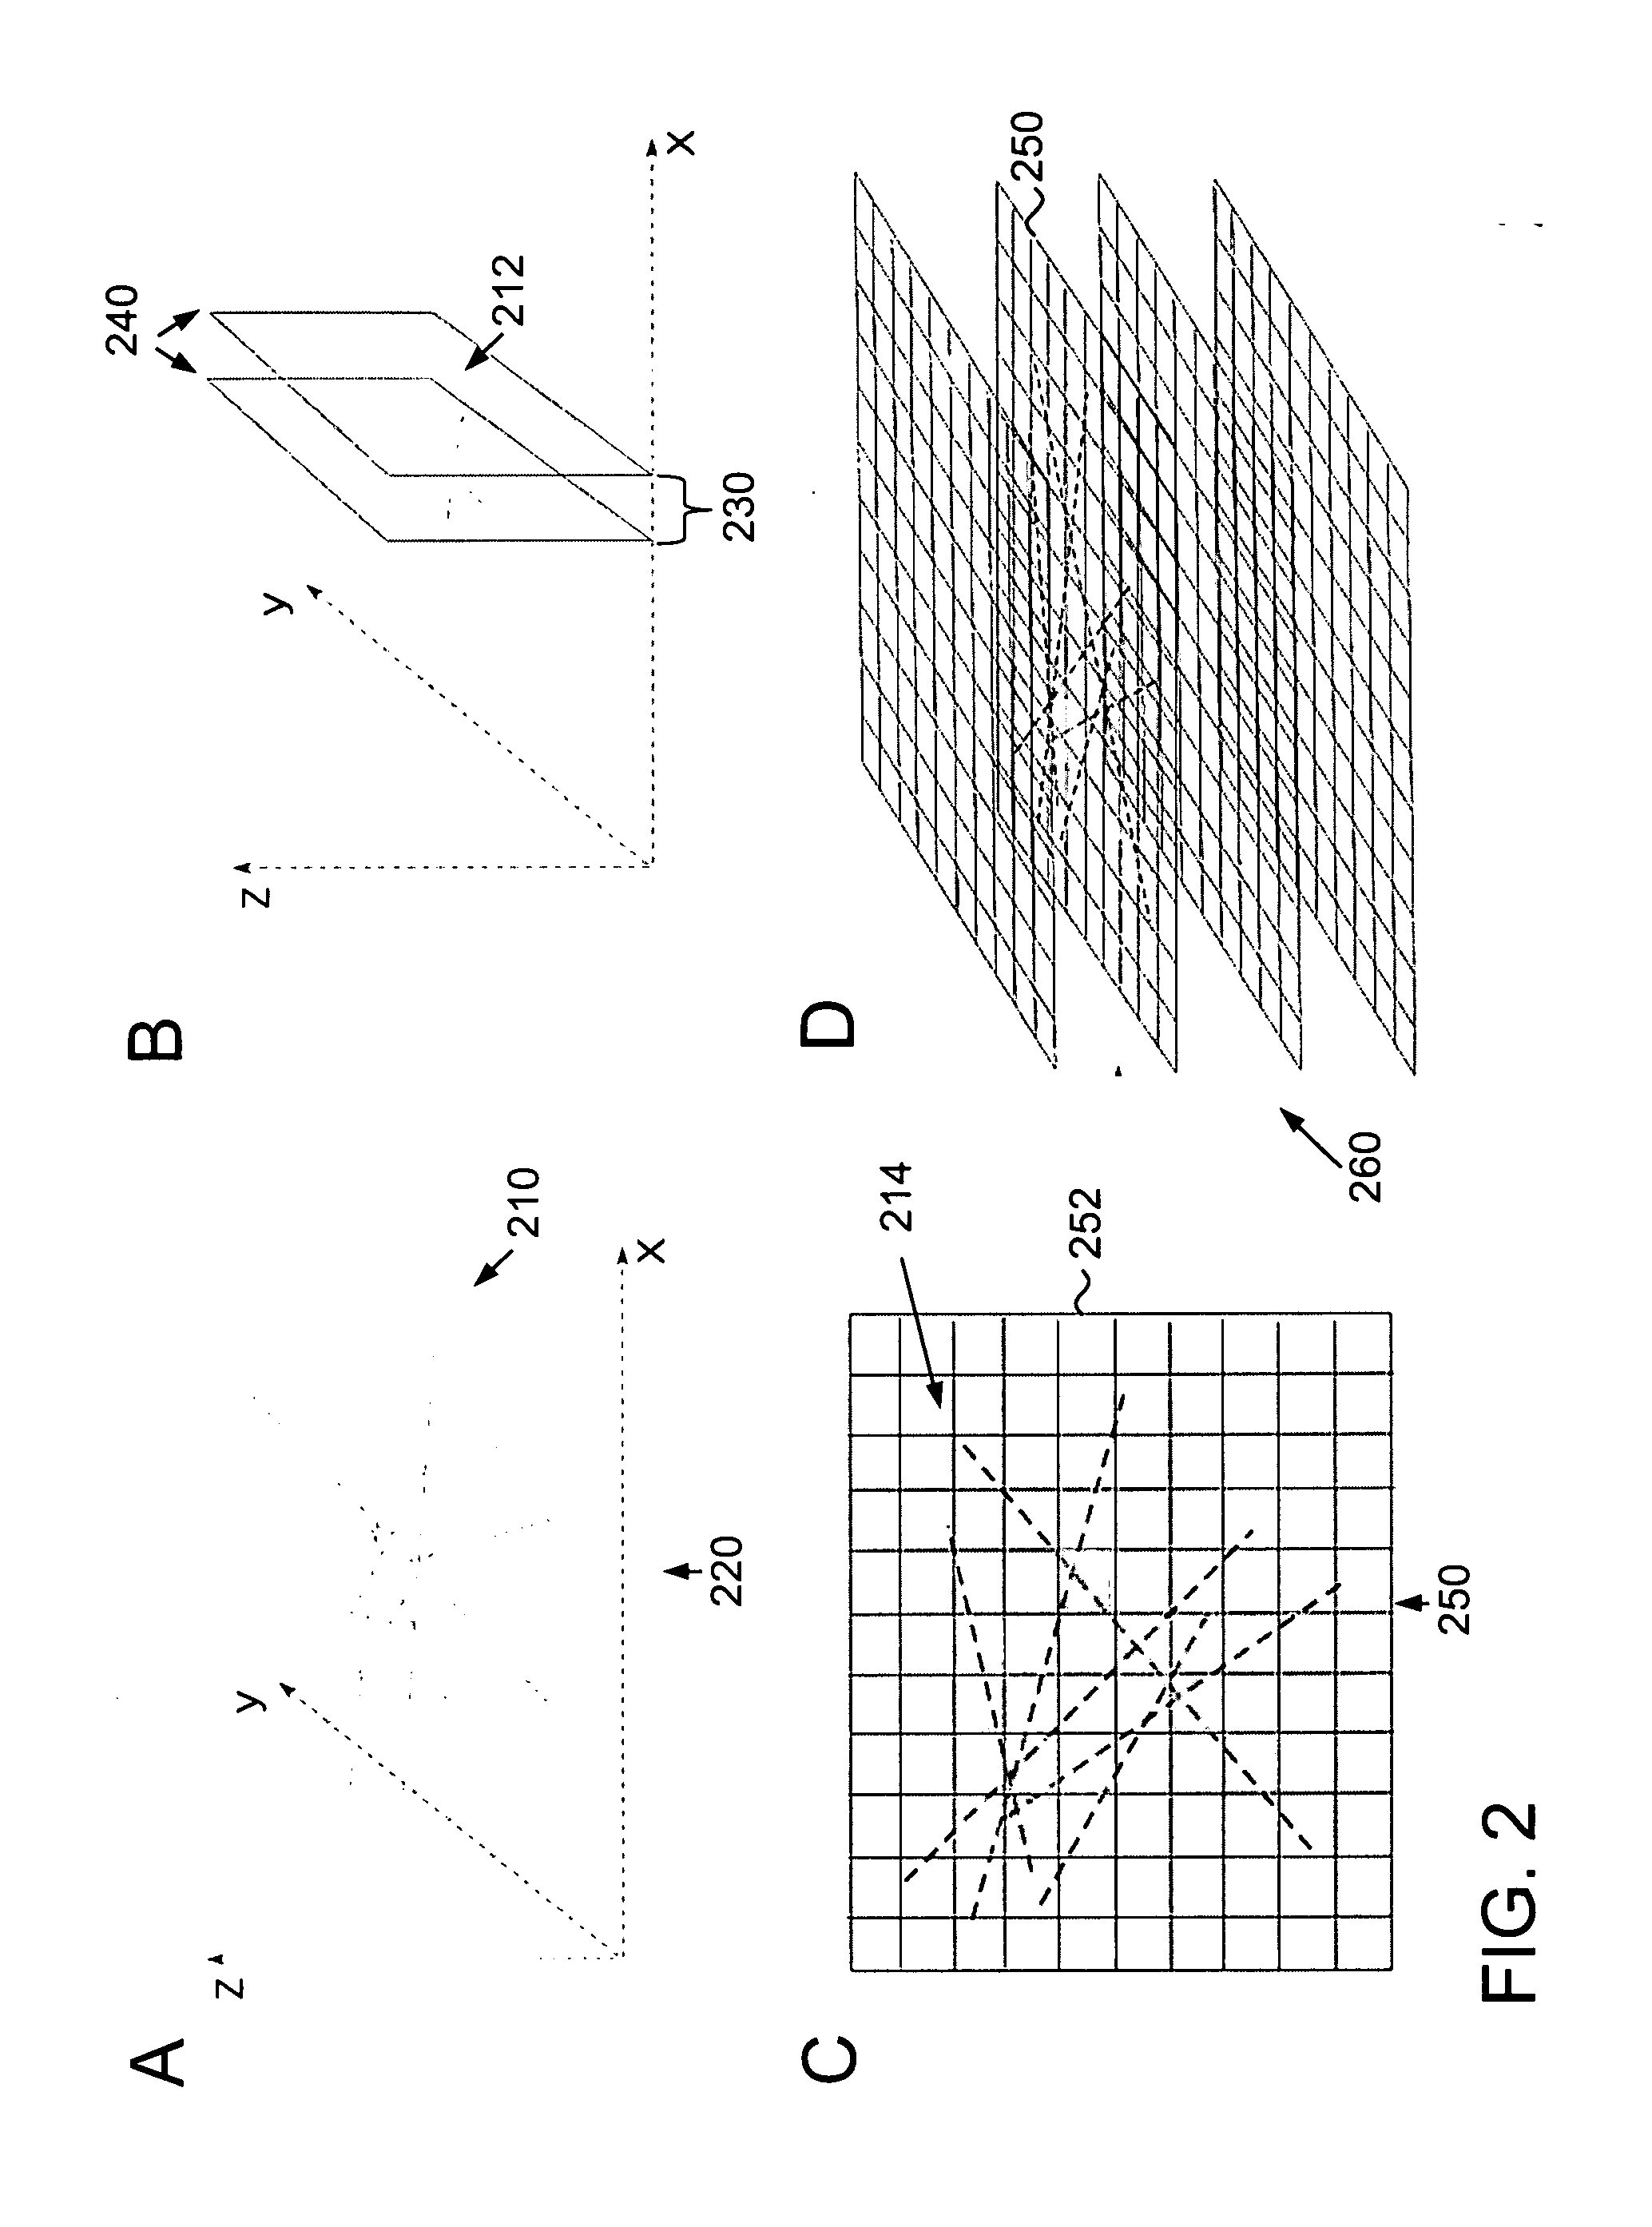 Method of reconstructing a tomographic image using a graphics processing unit